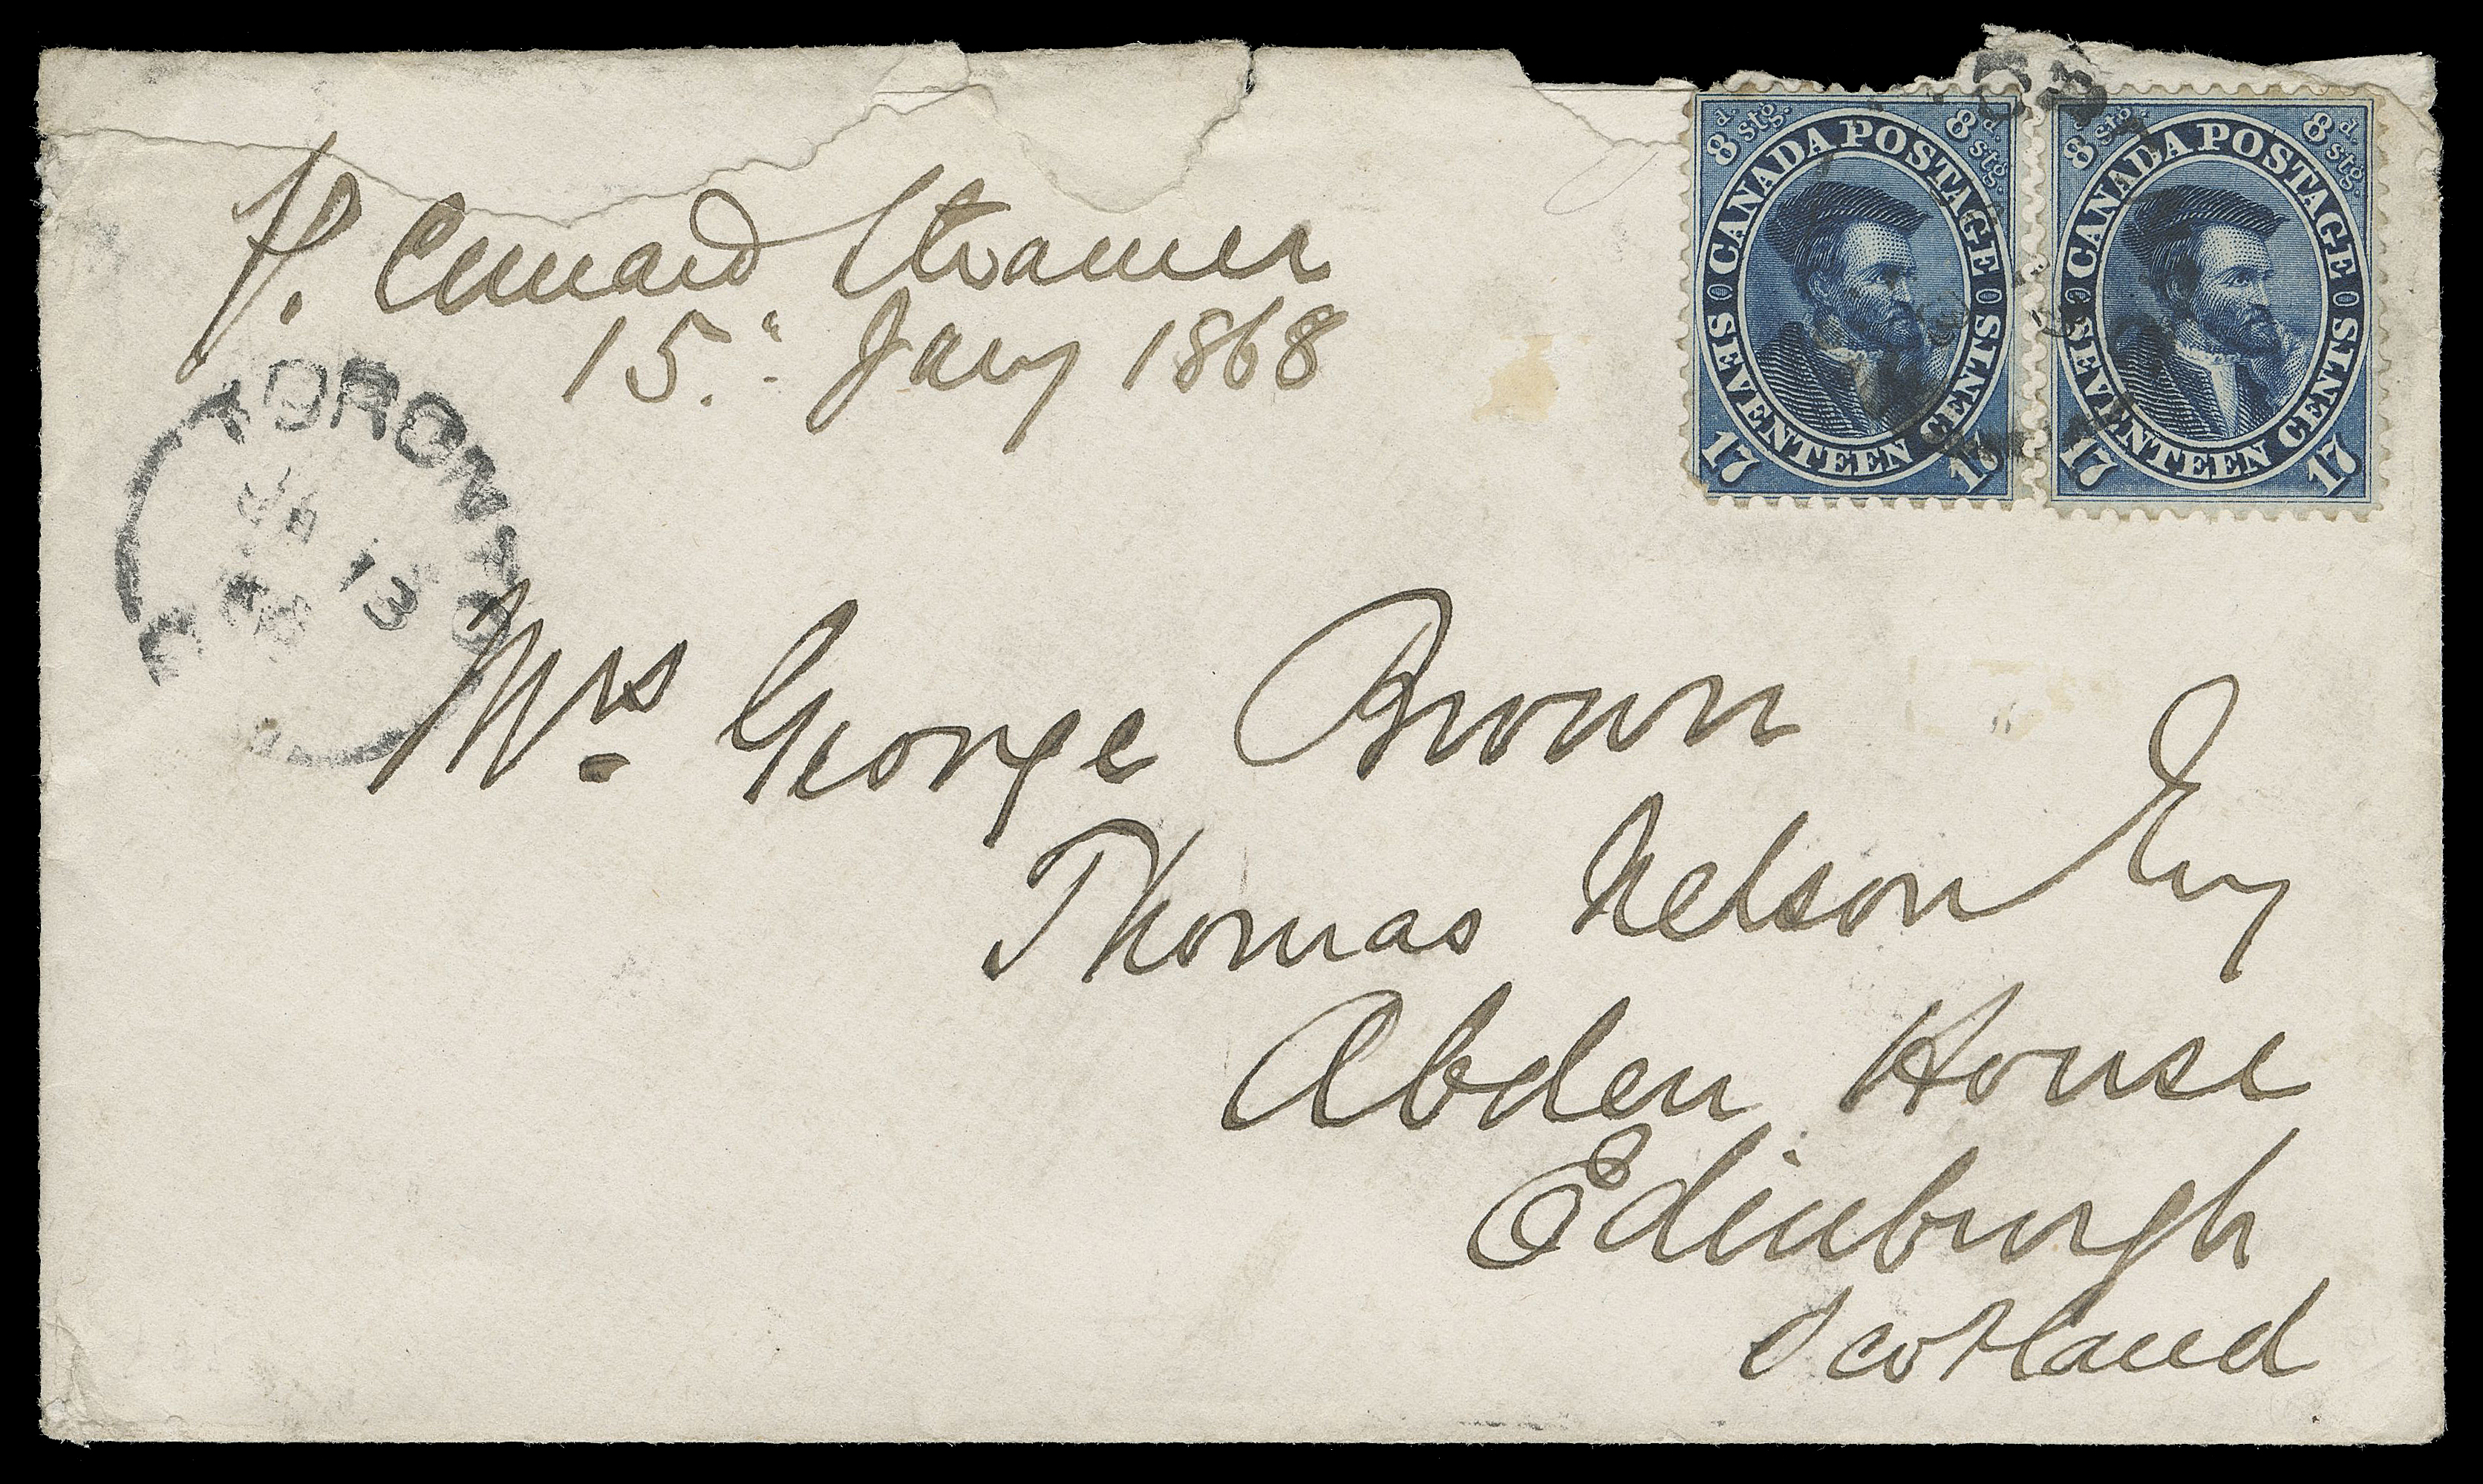 TEN PENCE AND SEVENTEEN CENTS  1868 (January 13) Cover endorsed "P. Cunard Steamer" addressed George Brown